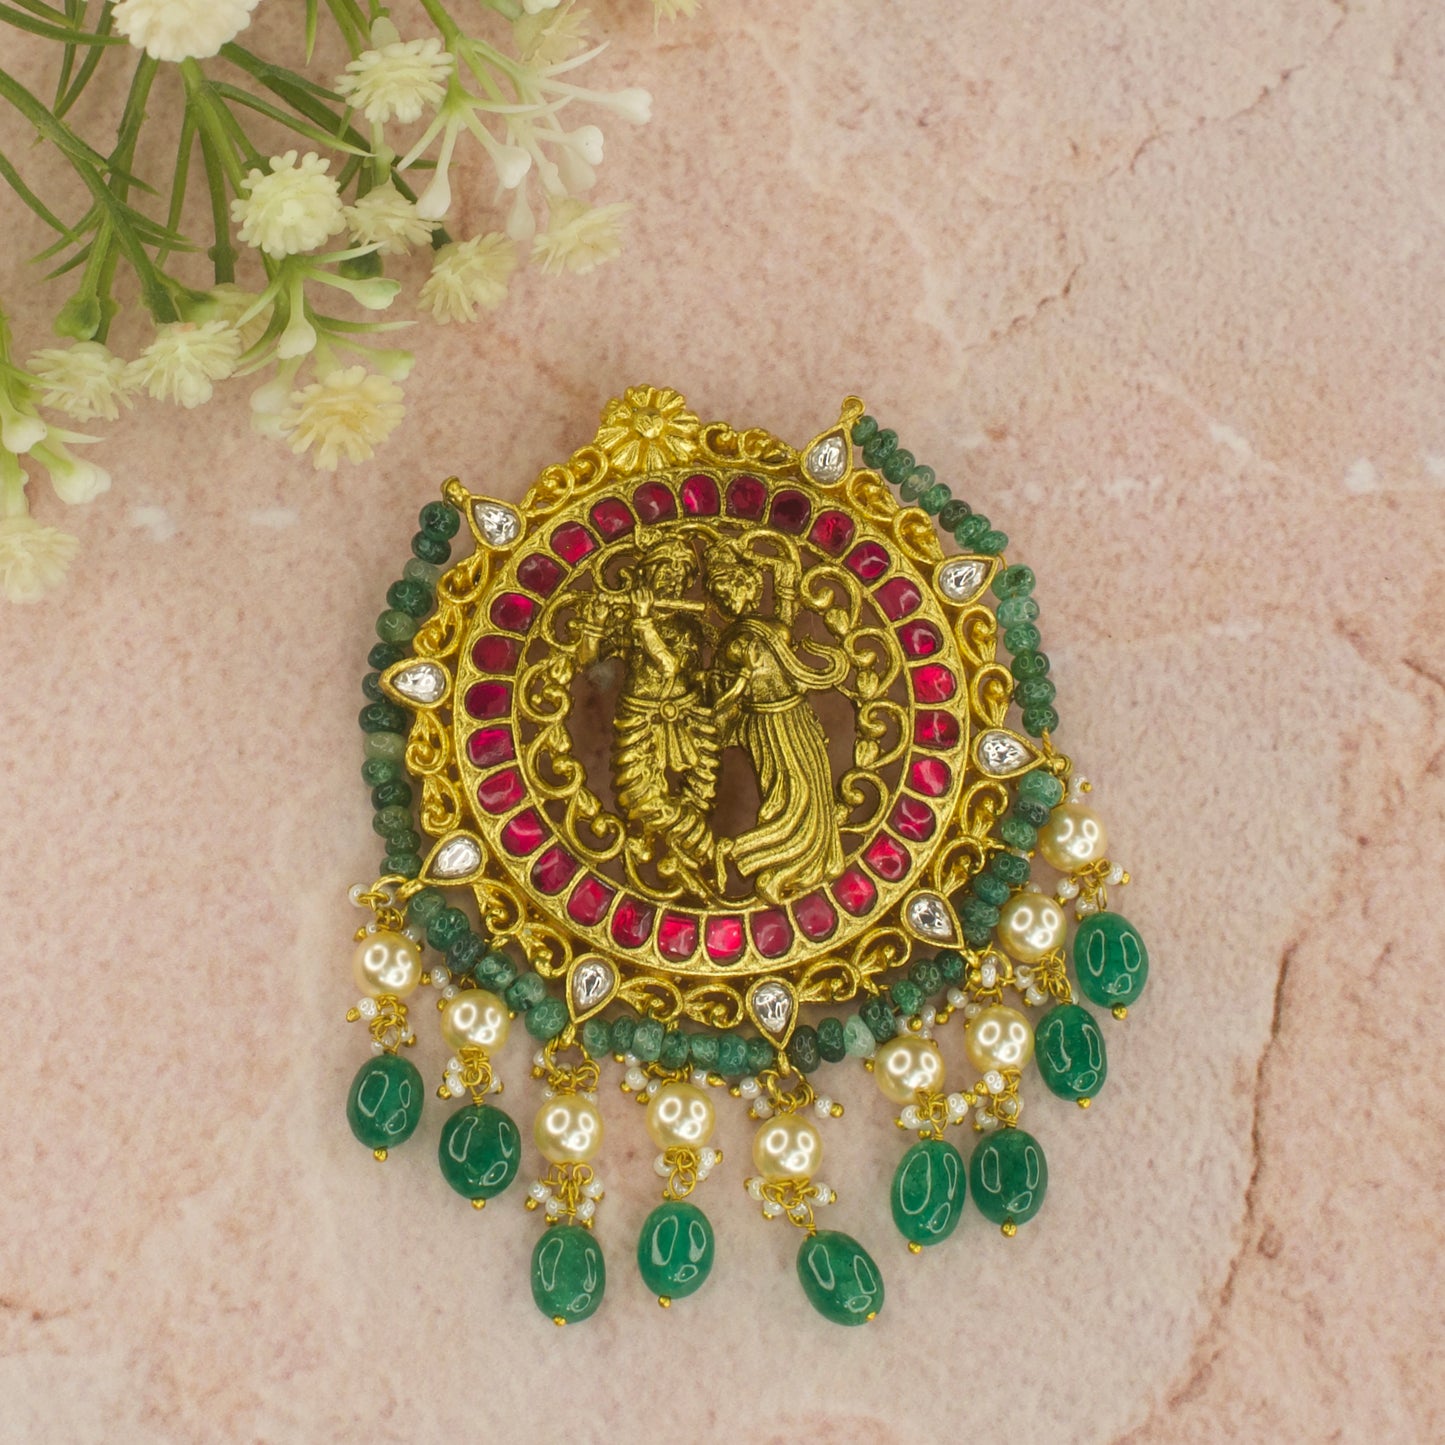 Here is Jadau Kundan Pendant with Nakshi Radha Krishna motifs. At bottom of the pendant we have Swarovski pearls and Russian emeralds, it is 22k gold plated